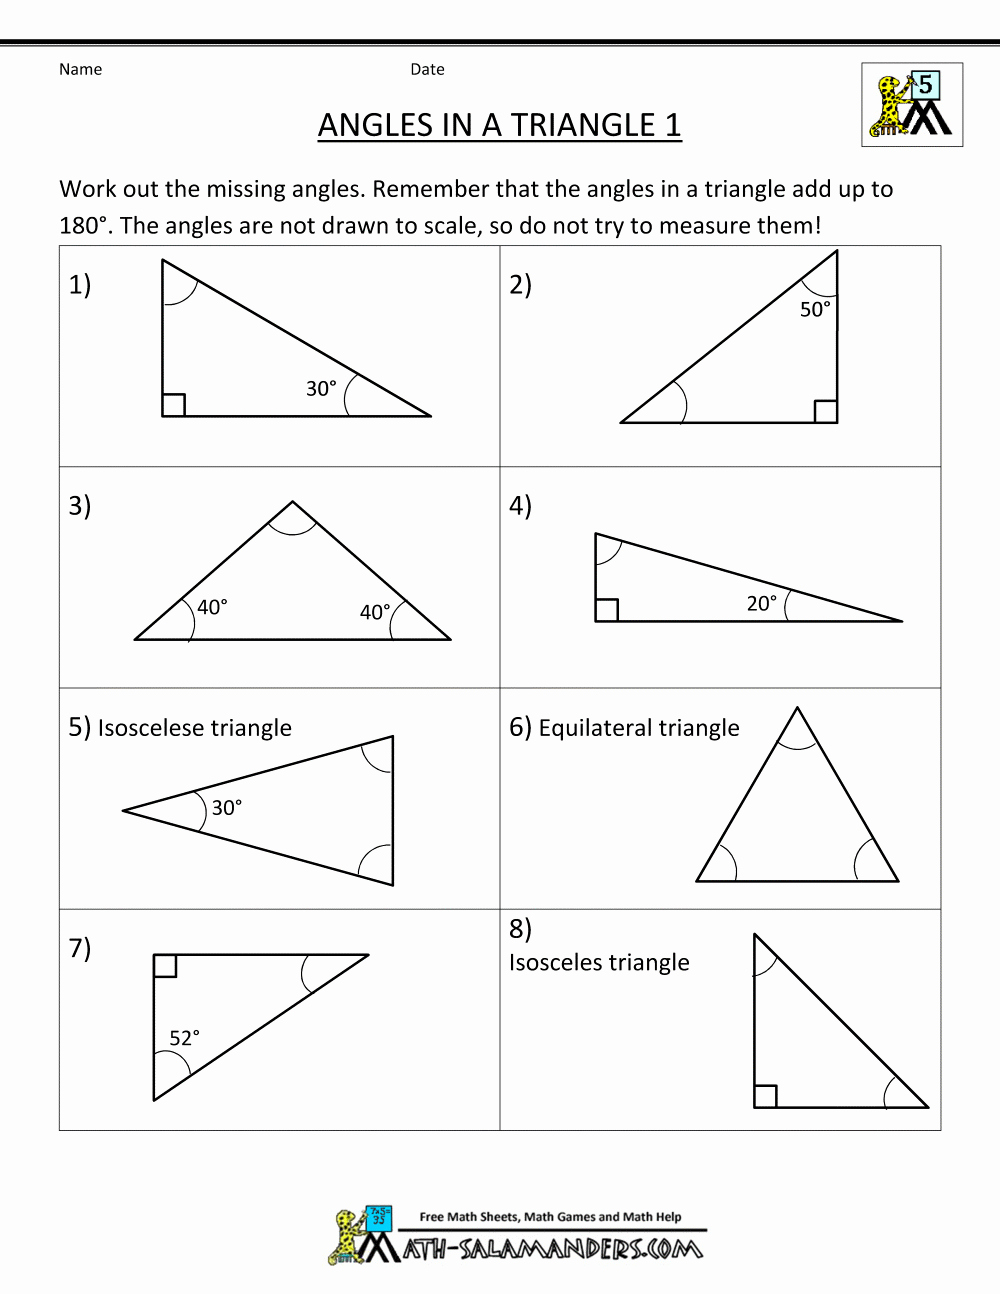 Triangle Angle Sum Worksheet Answers Best Of Worksheet Sum Angles In A Triangle Worksheet Grass